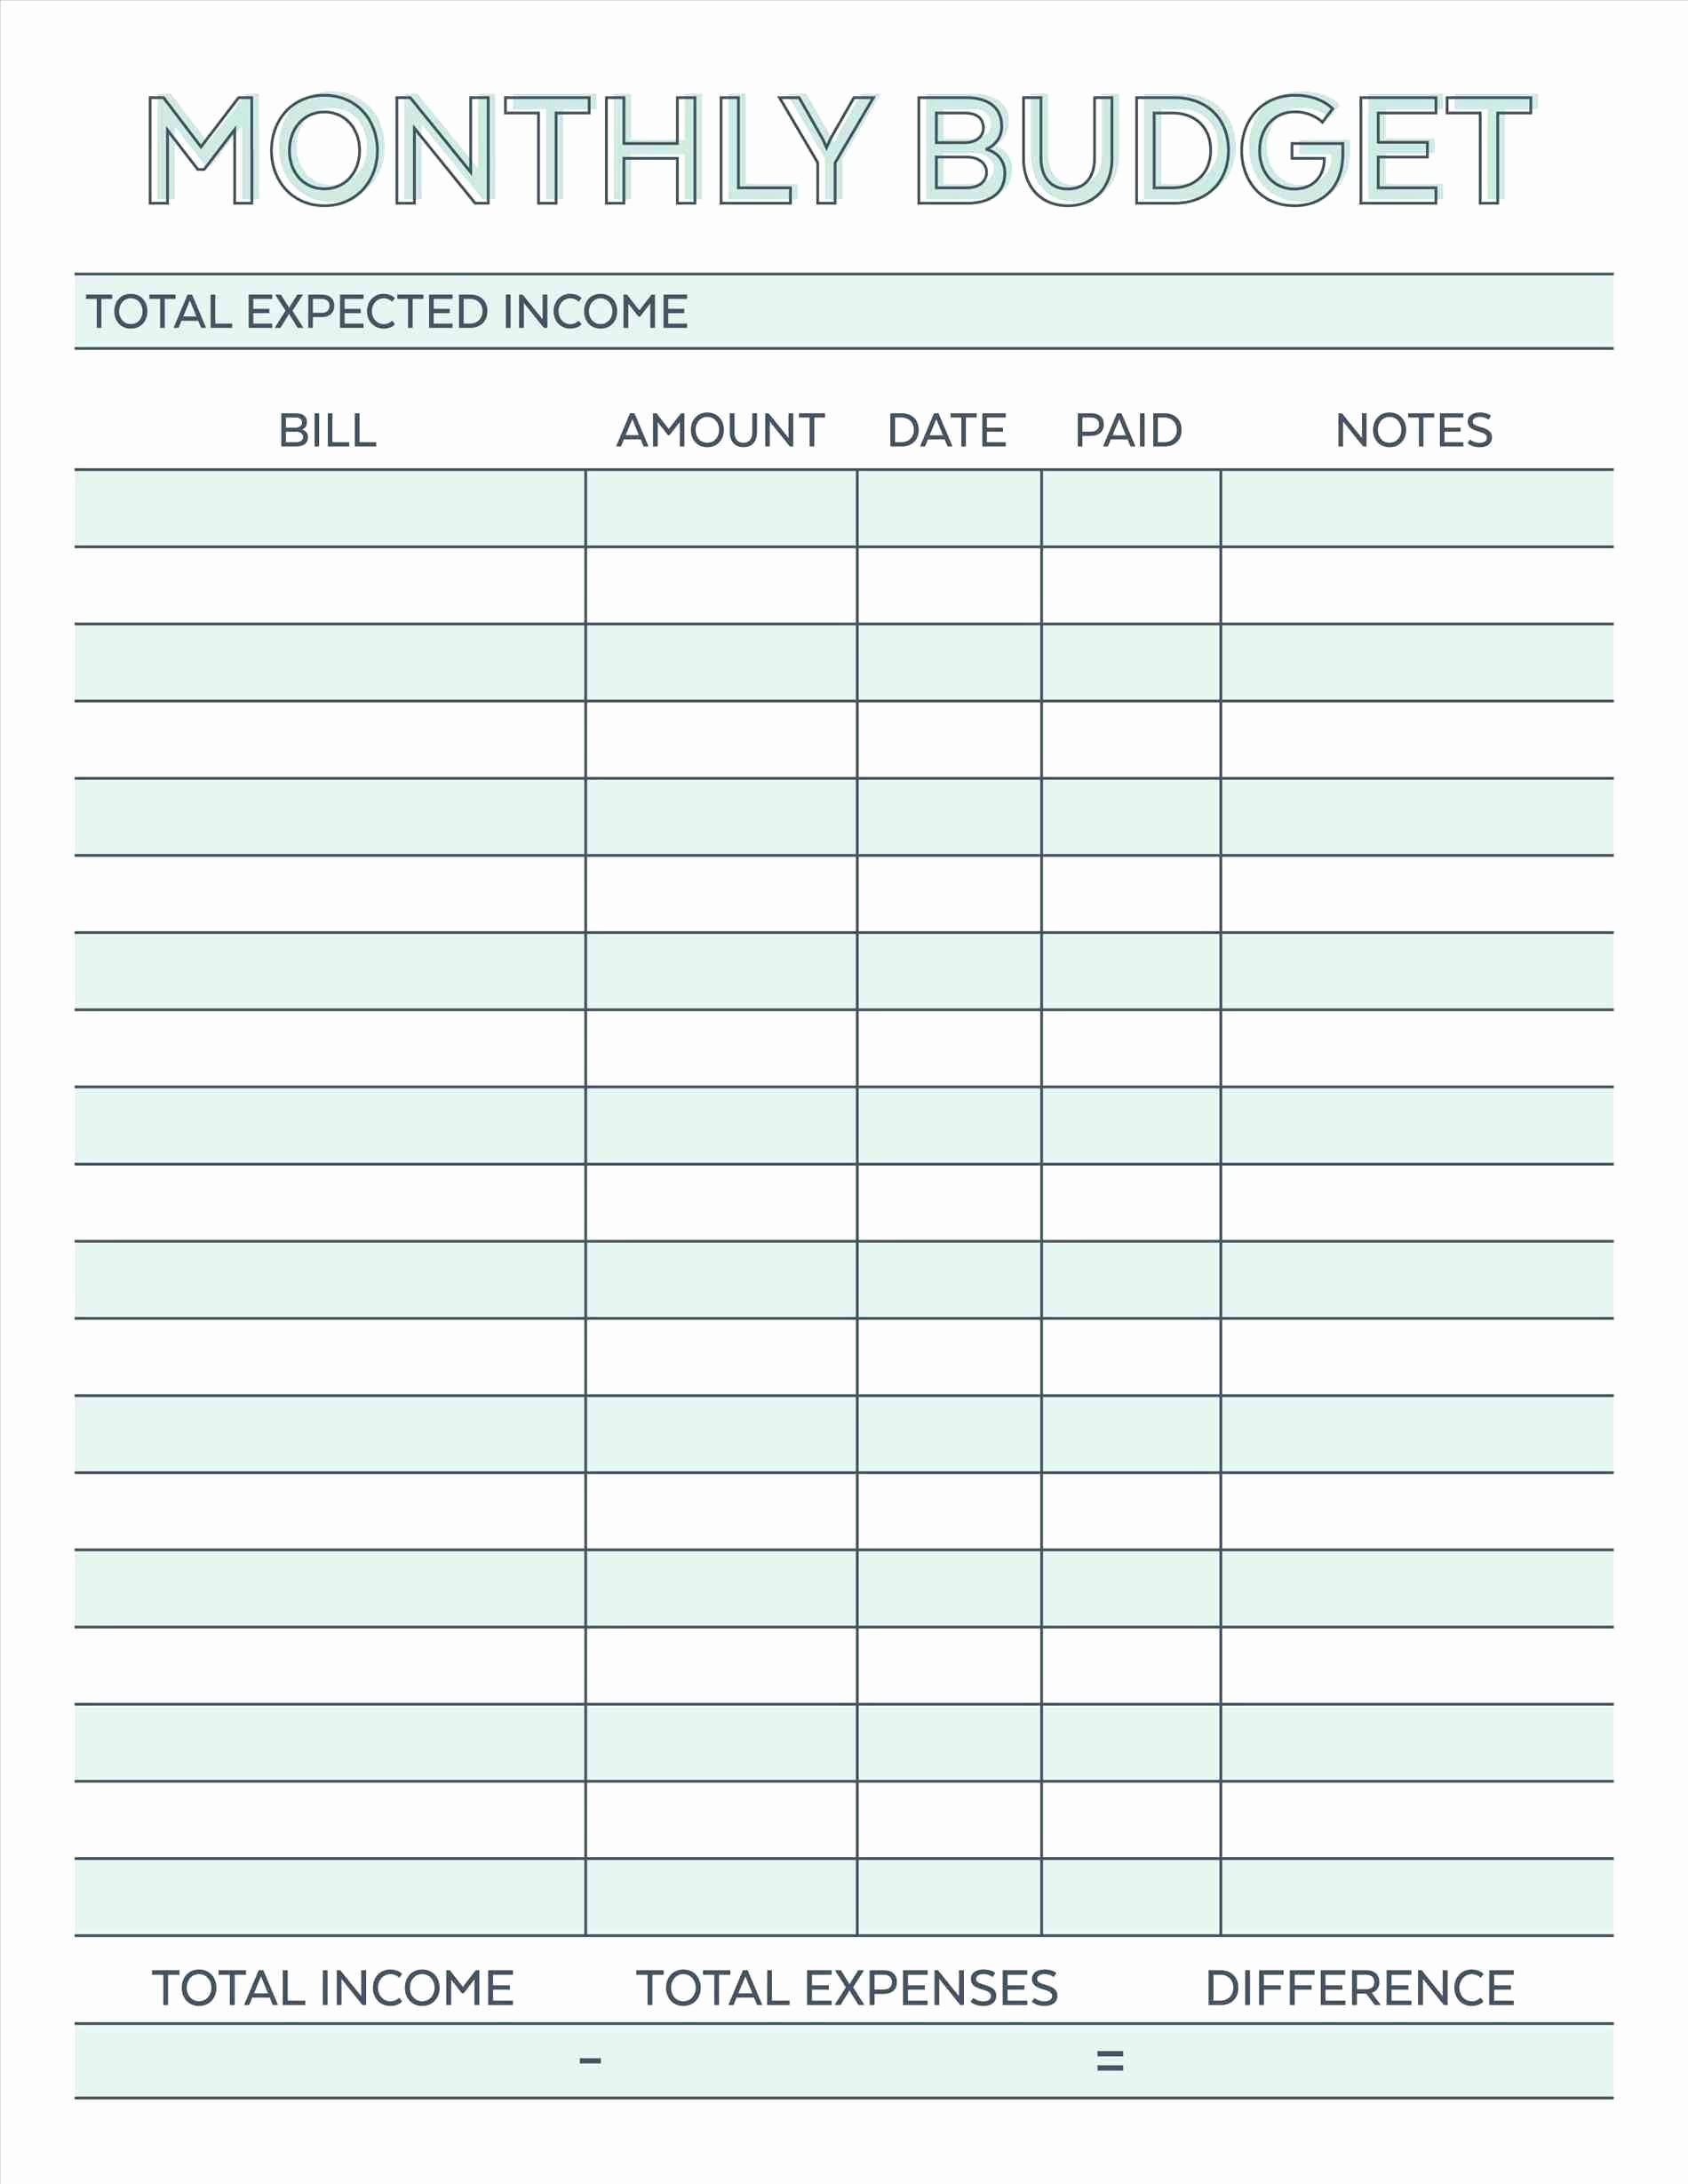 Monthly Budget Excel Template Fresh Bud Planner Planner Worksheet Monthly Bills Template